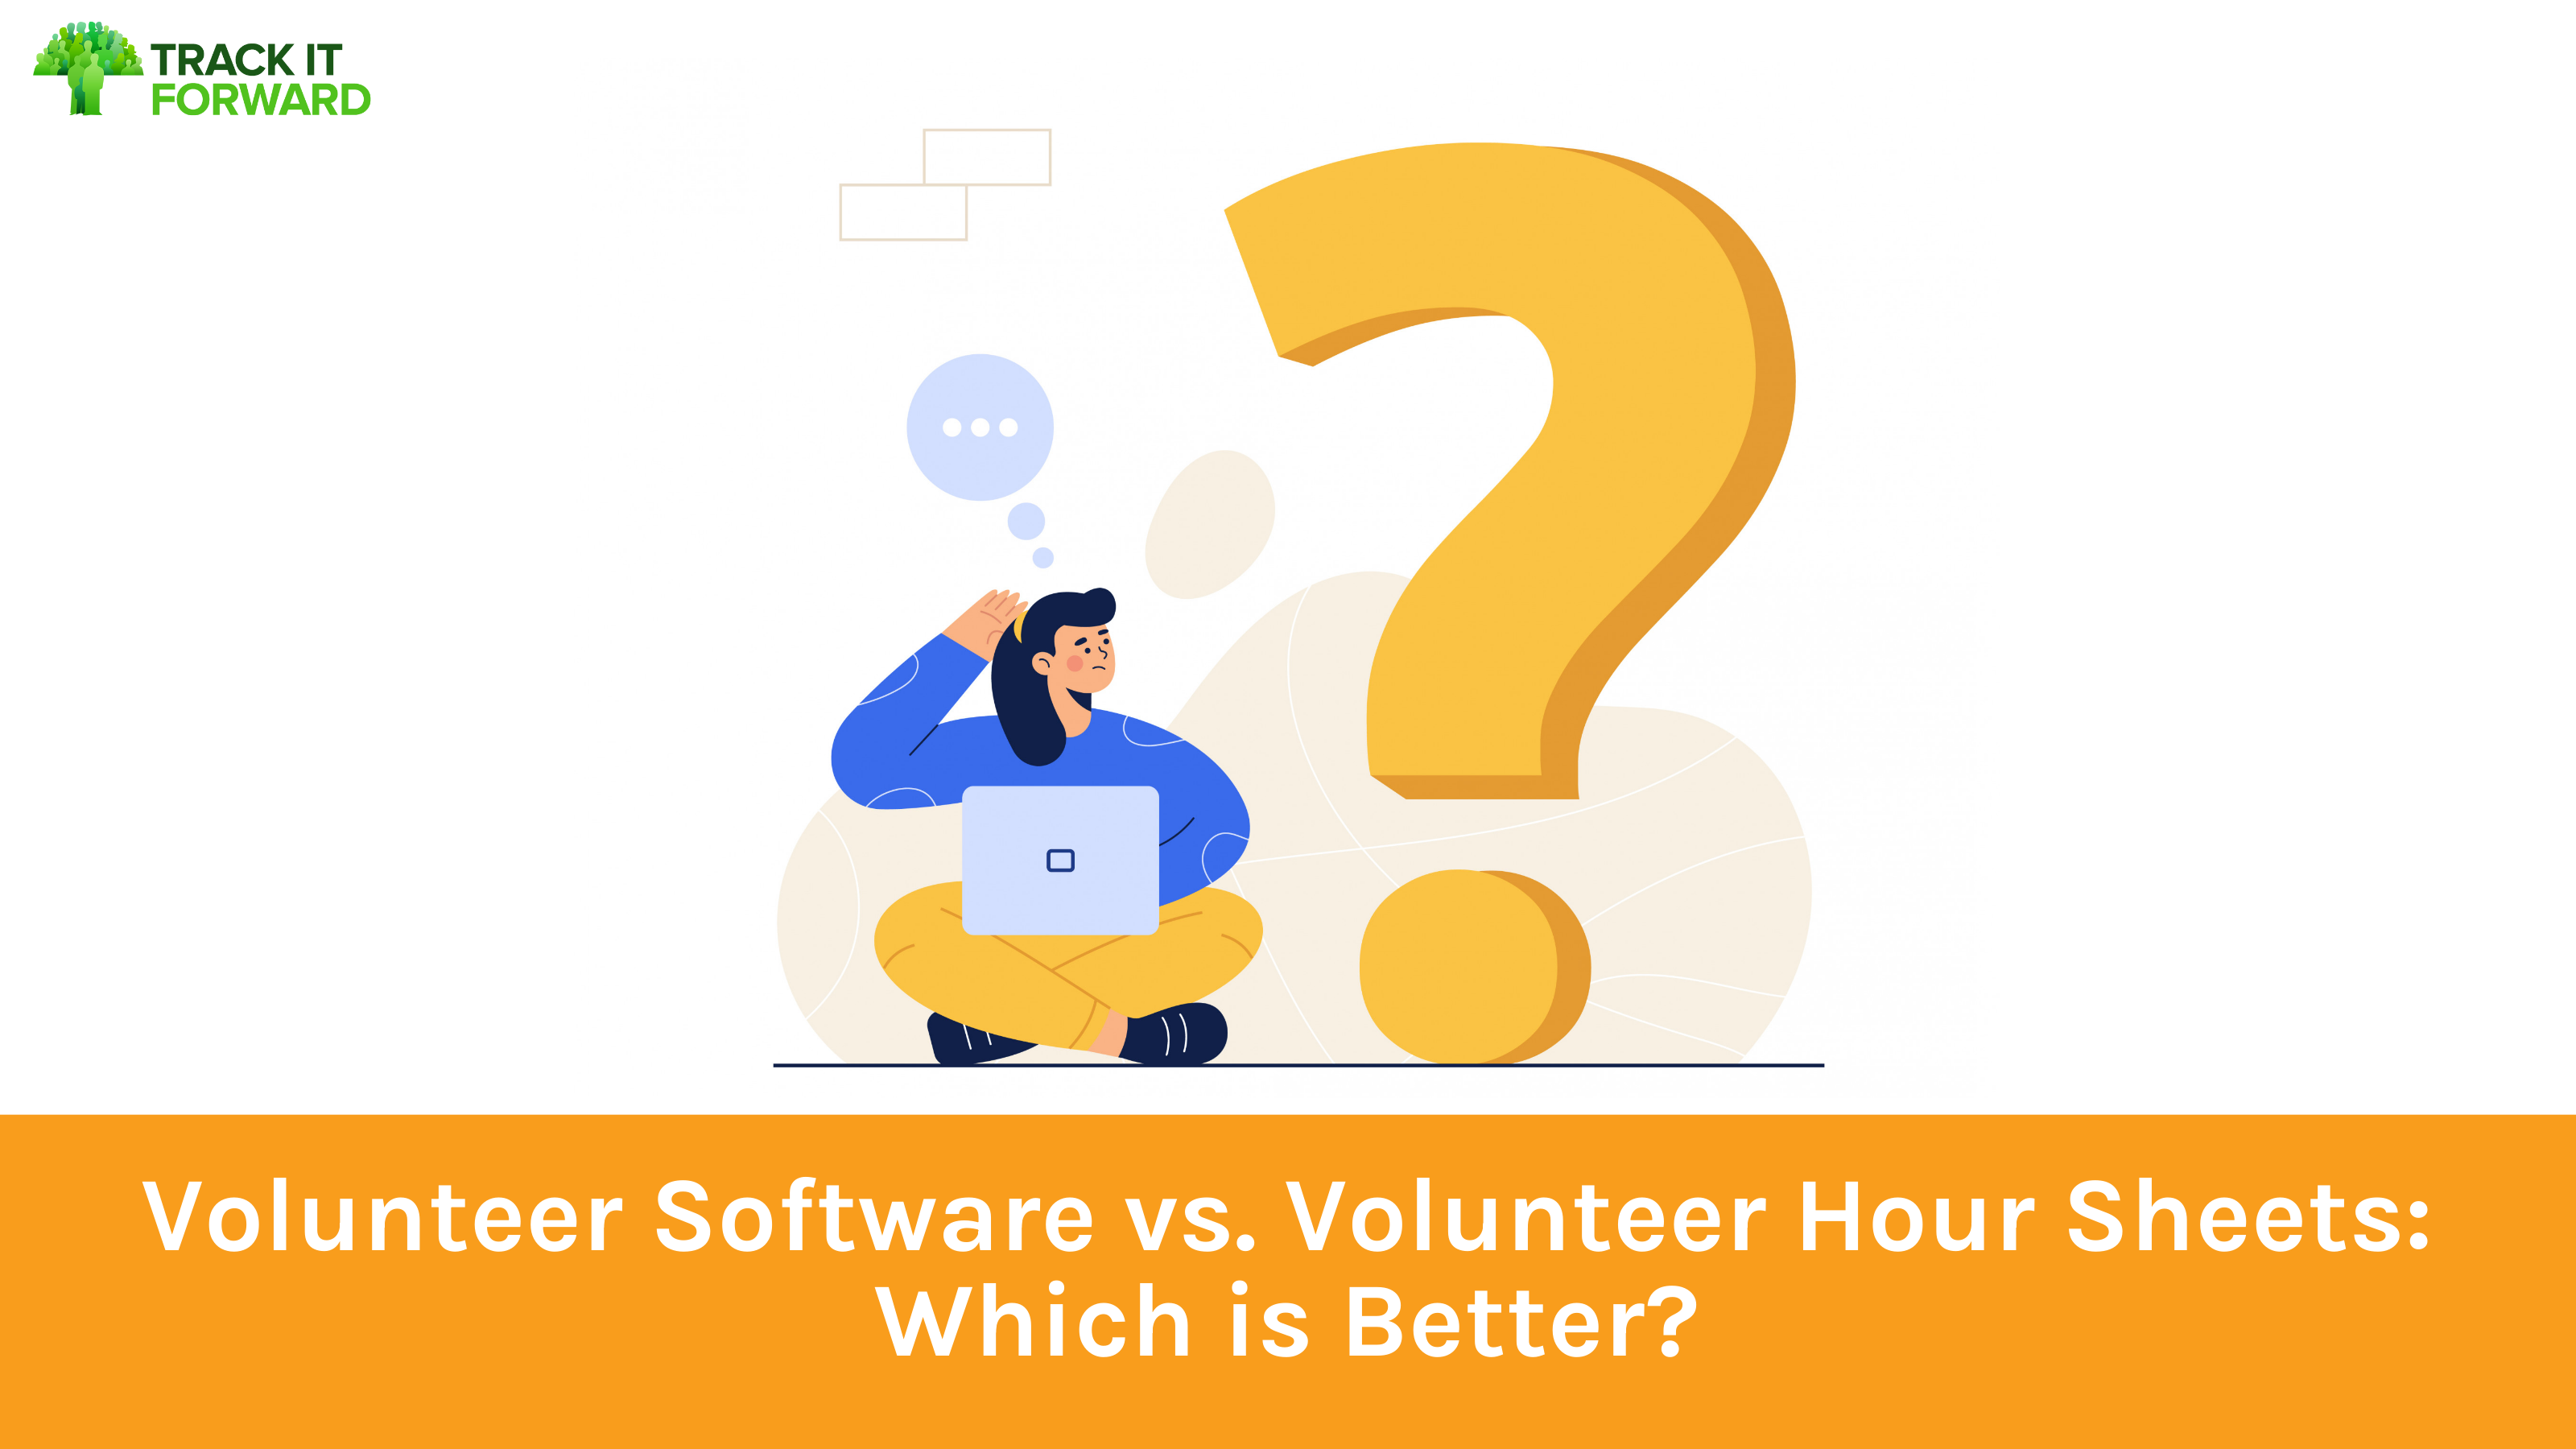 Graphic of woman with a laptop and a giant question mark with text: Volunteer Software vs. Volunteer Hour Sheets: Which is Better?